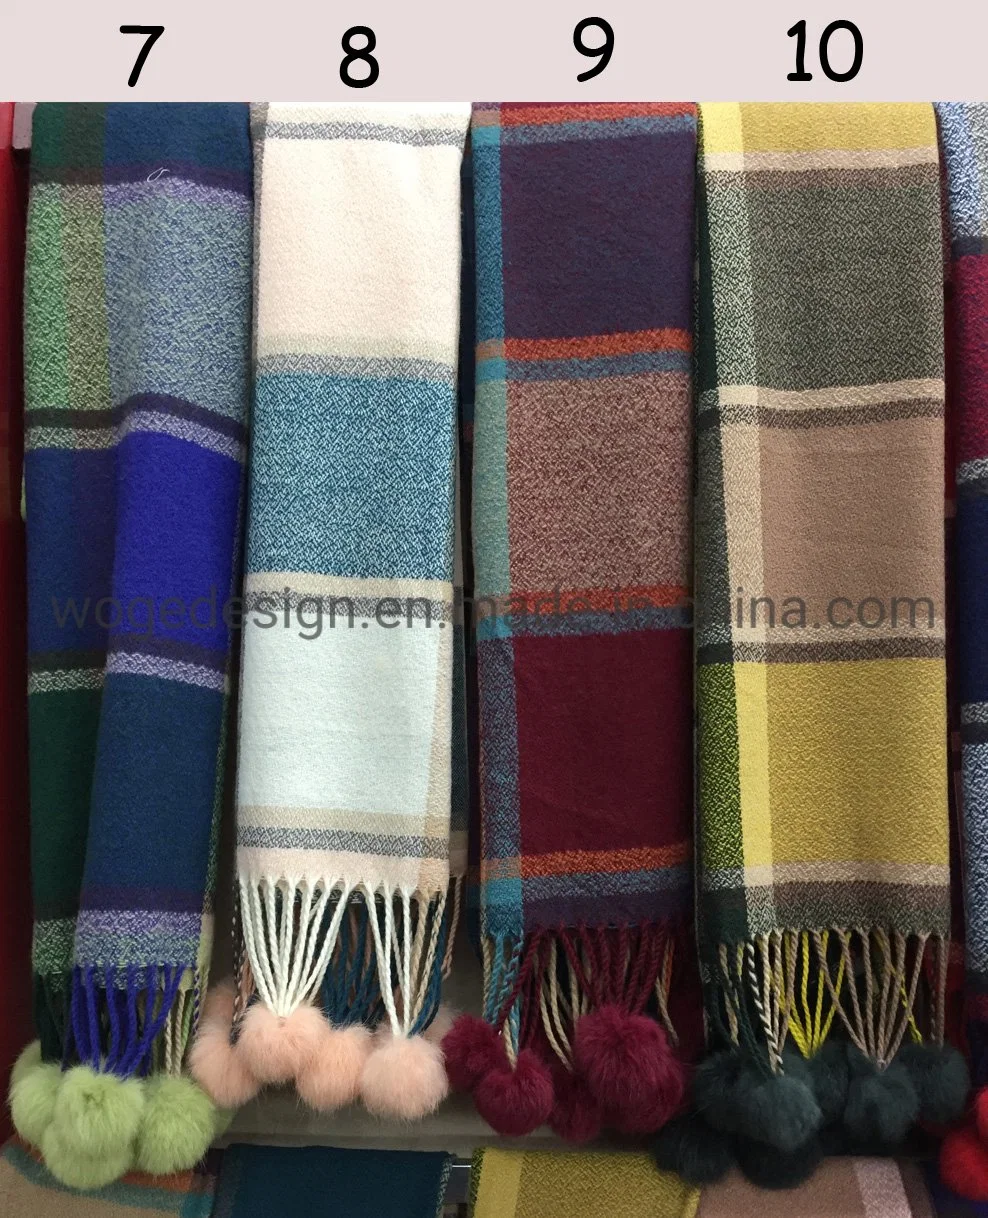 Top Sold Woge Supplier Wholesale Winter Femme Wrap Pashmina Other Shawl Acrylic Plaid Tartan Scarf with Rabbit Fur Pompoms